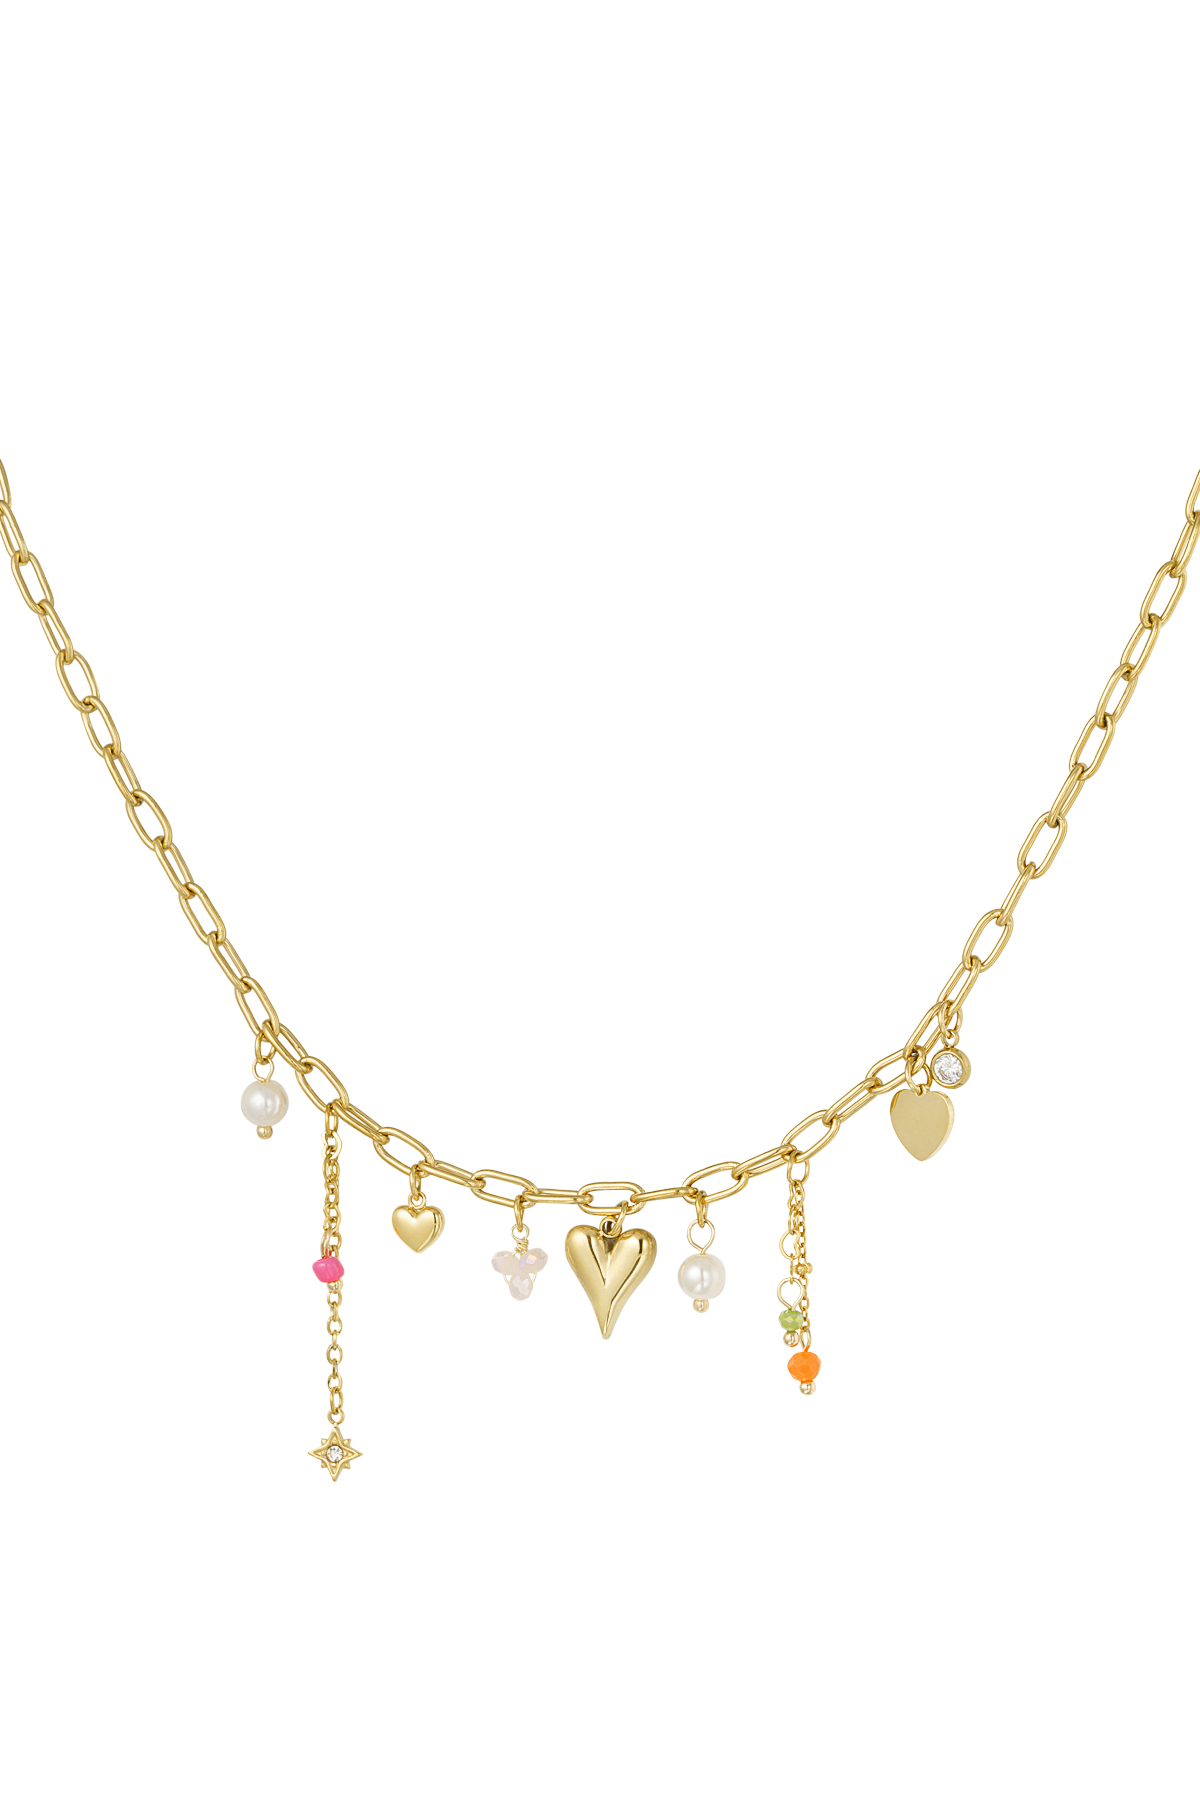 Bedelketting amore color - goud